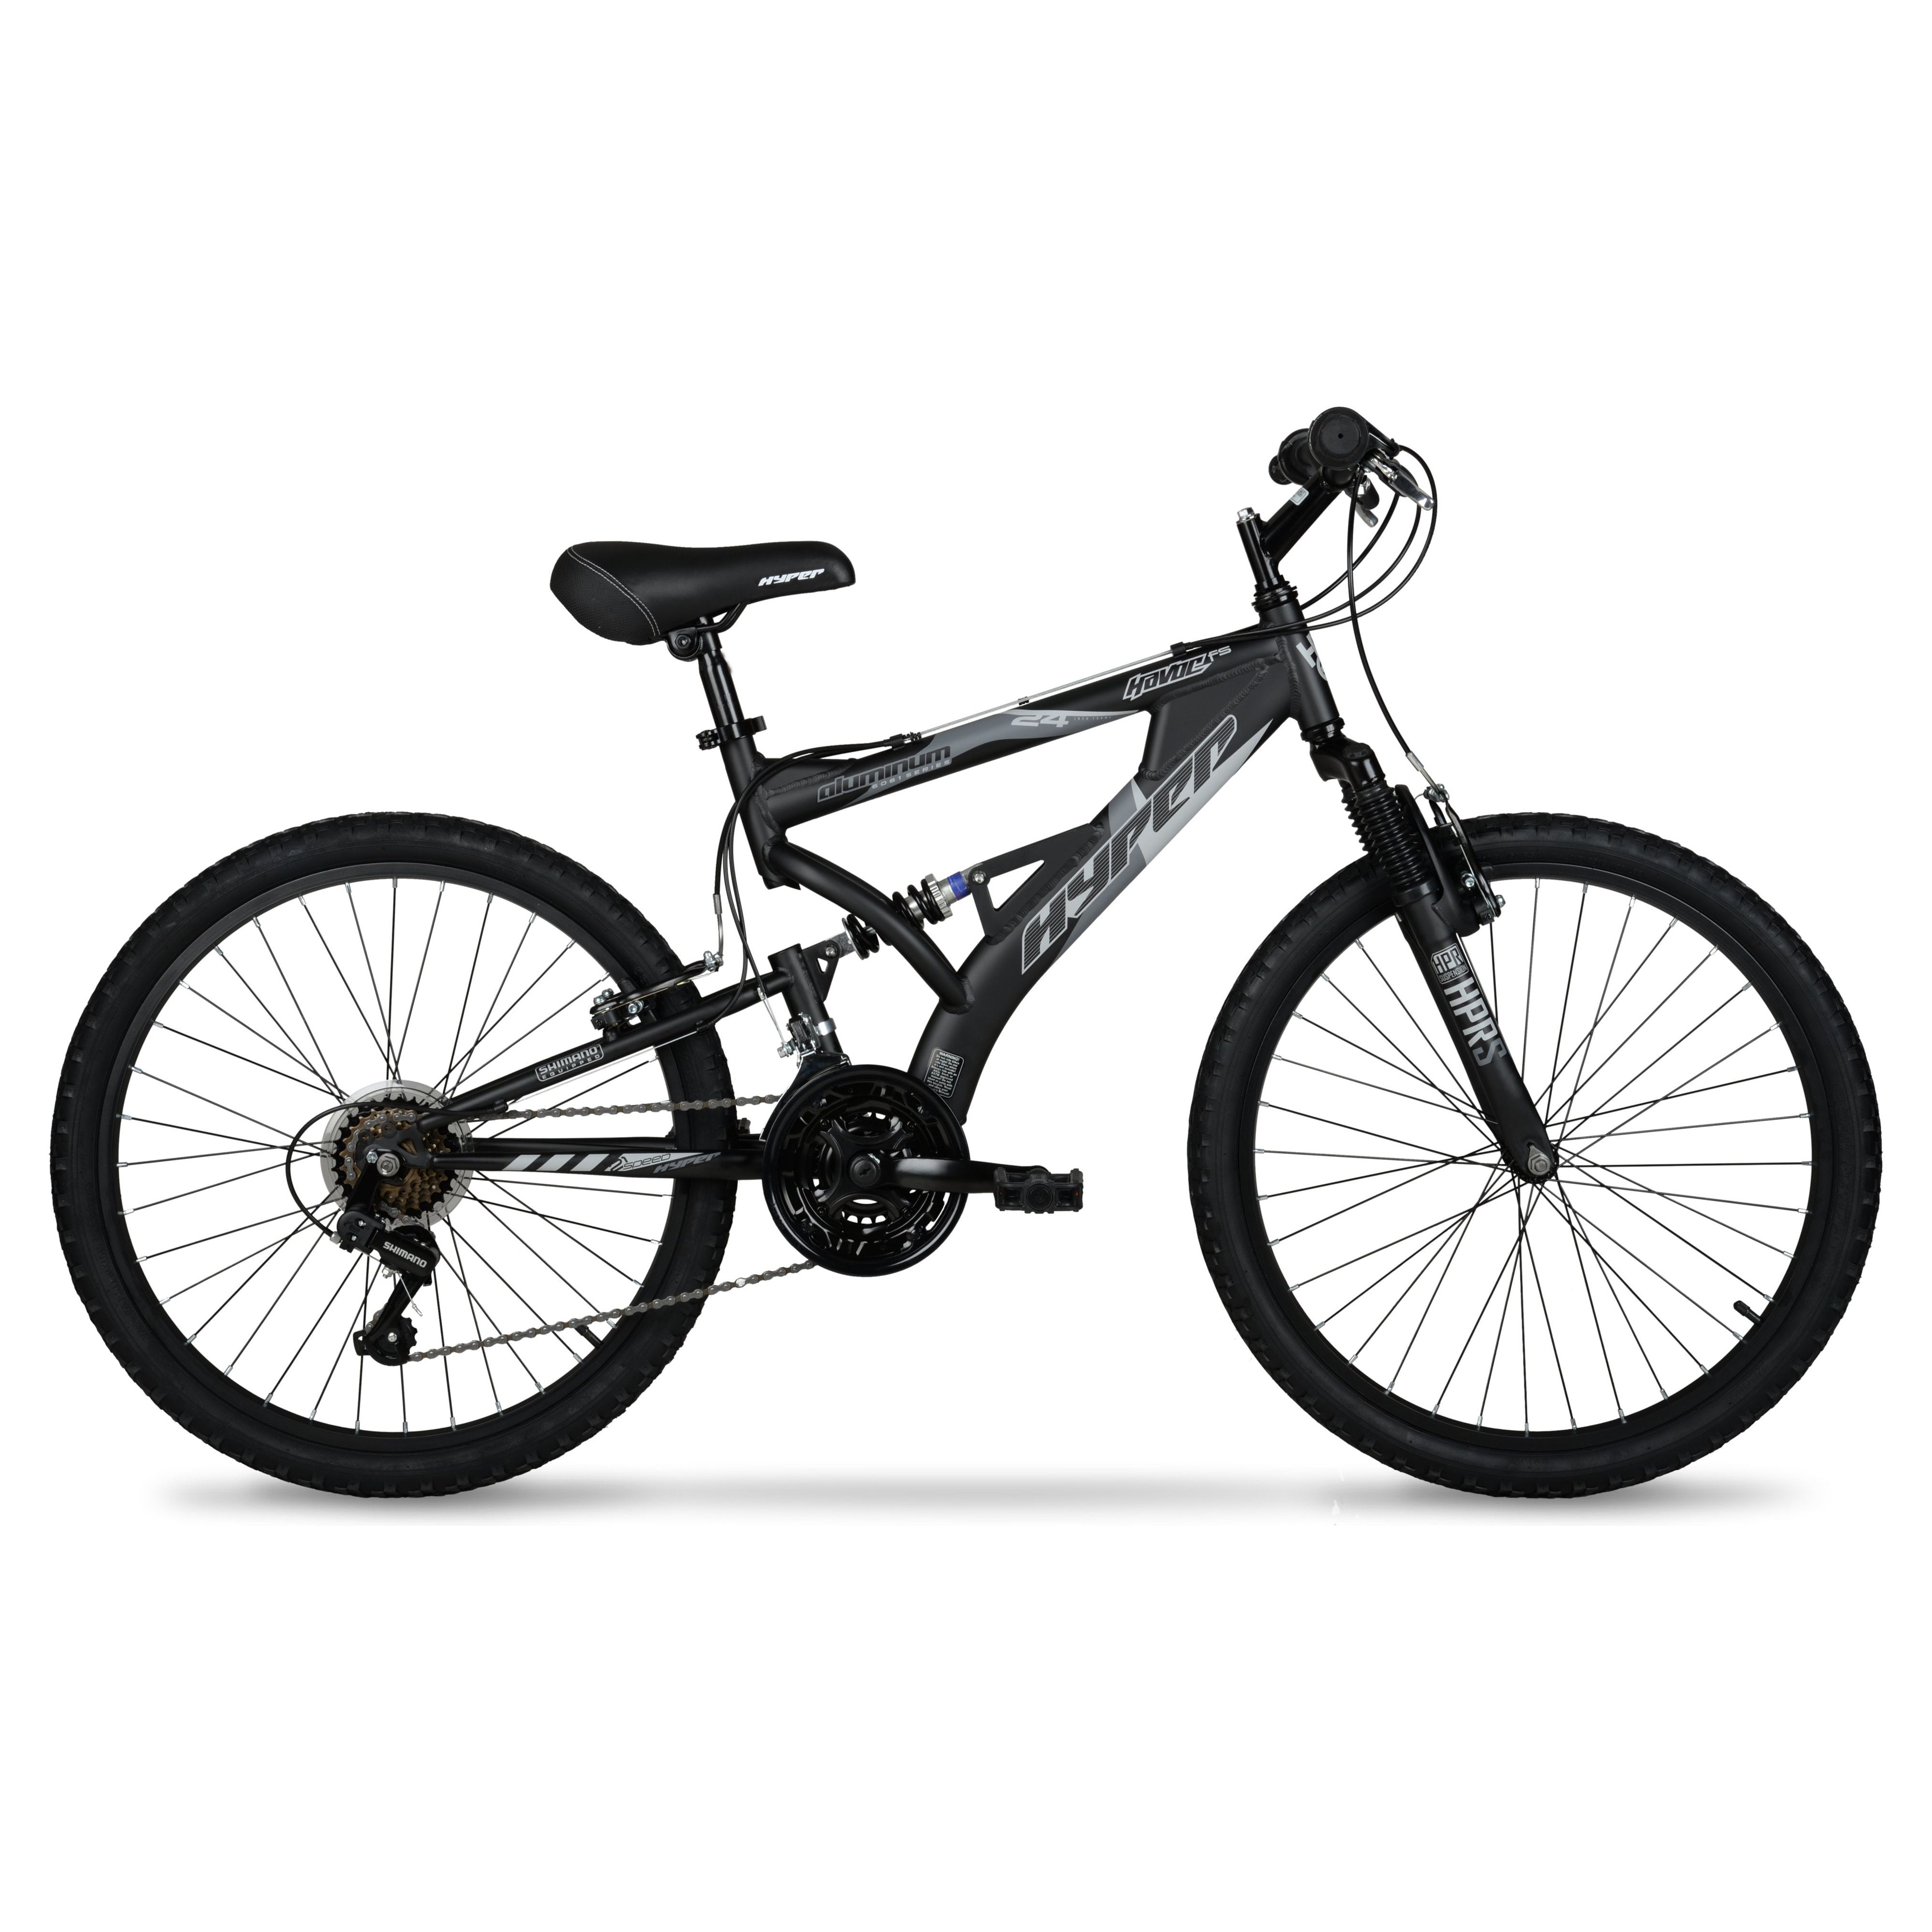 Hyper Bicycles 24" Boy's Havoc Mountain Bike, Black, Recommended Ages group 10 to 14 Years Old - image 1 of 14